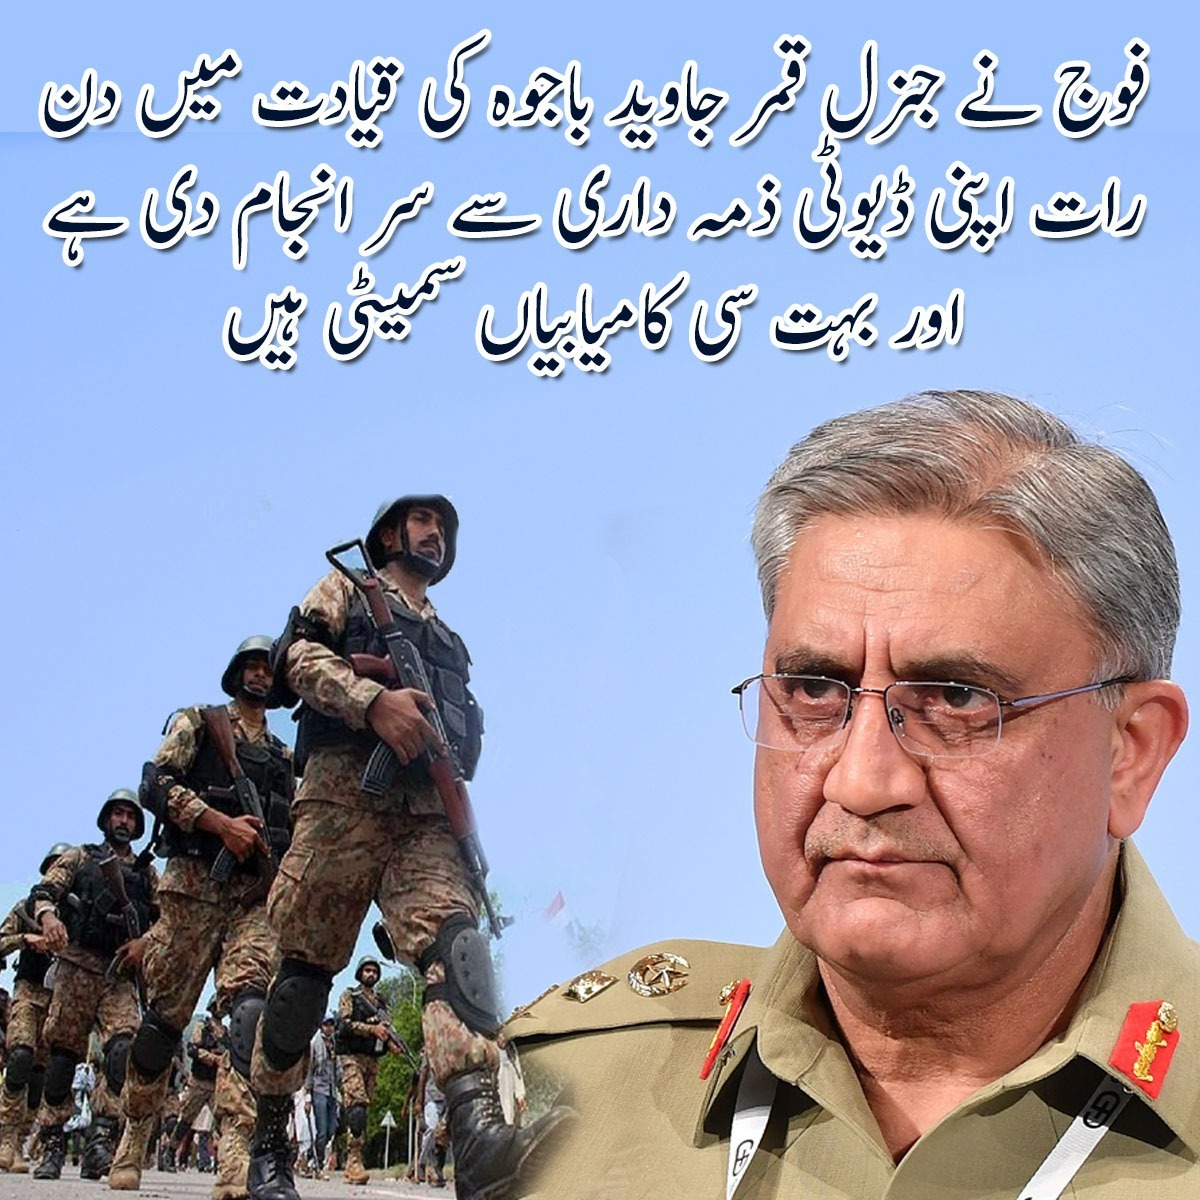 Bajwa who always stood strong against the any hurdle comes in the way of protecting his country the man with honour and the most decorated man in the army Mr Bajwa we loved you we are proud you.
#BehindYouBajwa
#GenBajwaWillStay